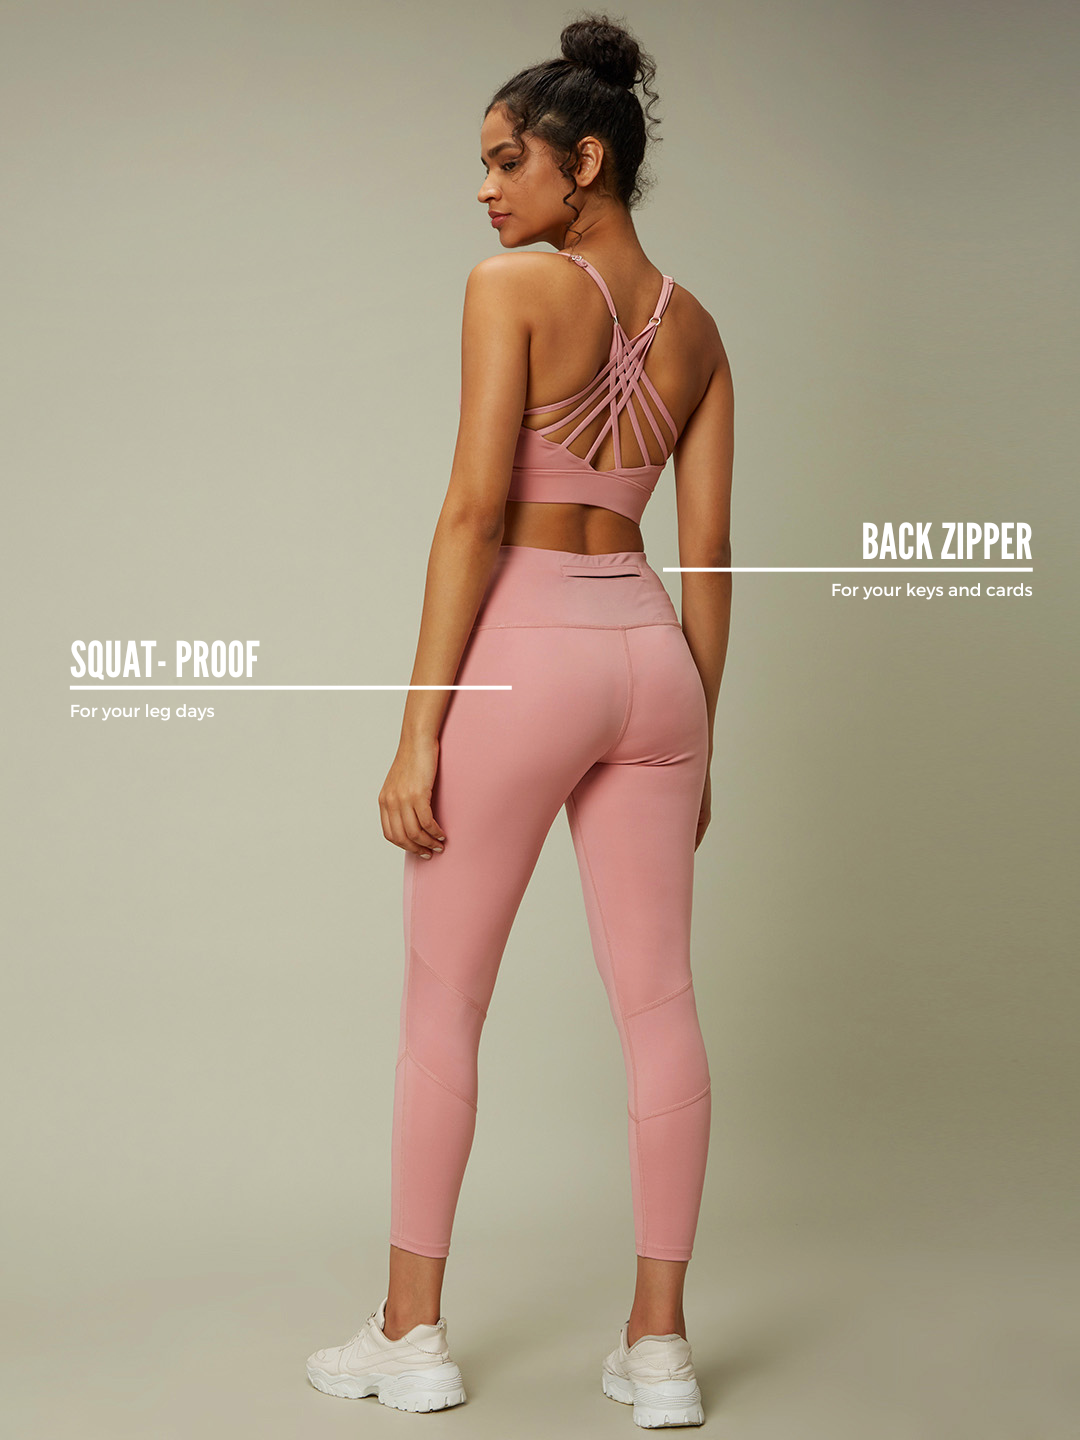 5 Pink Leggings From Nike for Every Workout . Nike.com